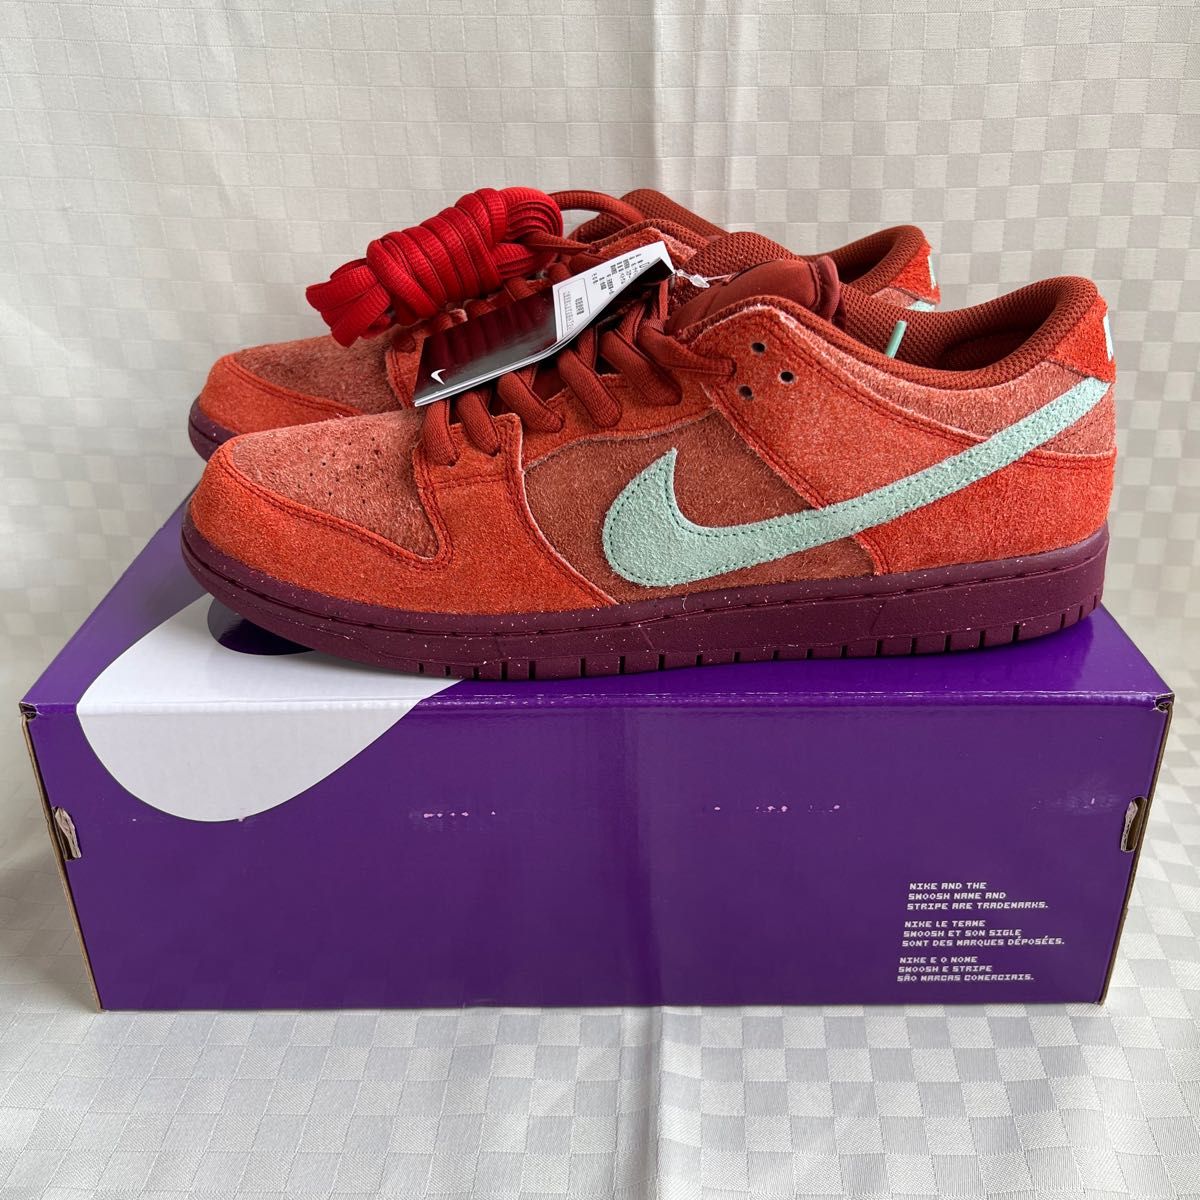 NIKE SB DUNK LOW PRO PRM MYSTIC RED AND ROSEWOOD US10.5 28.5cm 新品